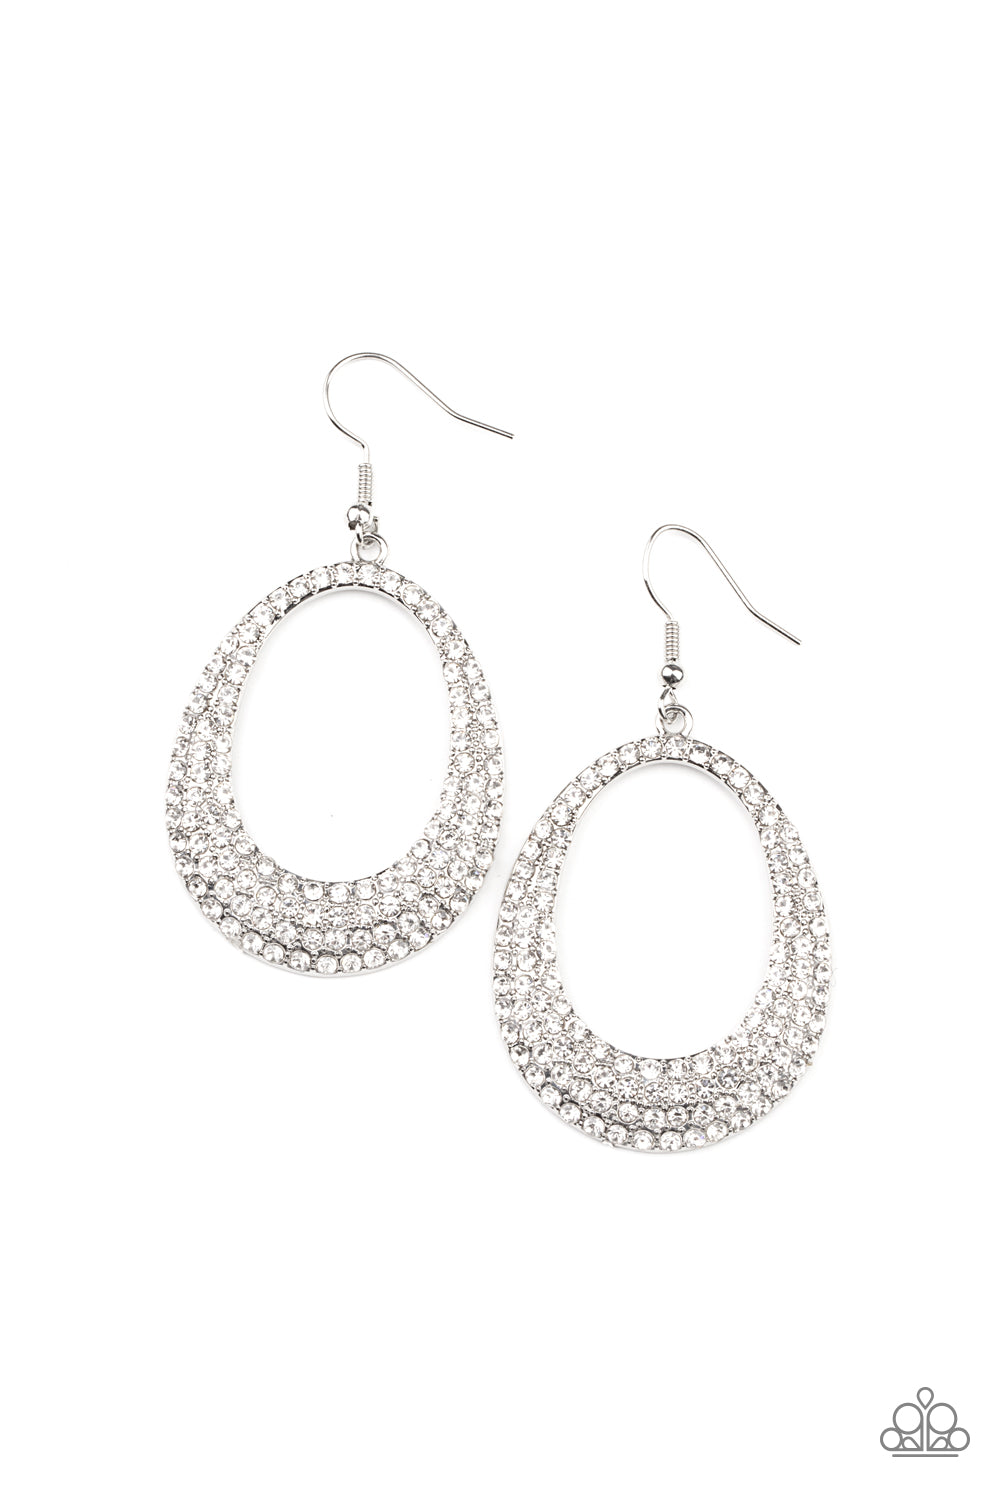 Paparazzi Life GLOWS On - White Earrings - A Finishing Touch Jewelry